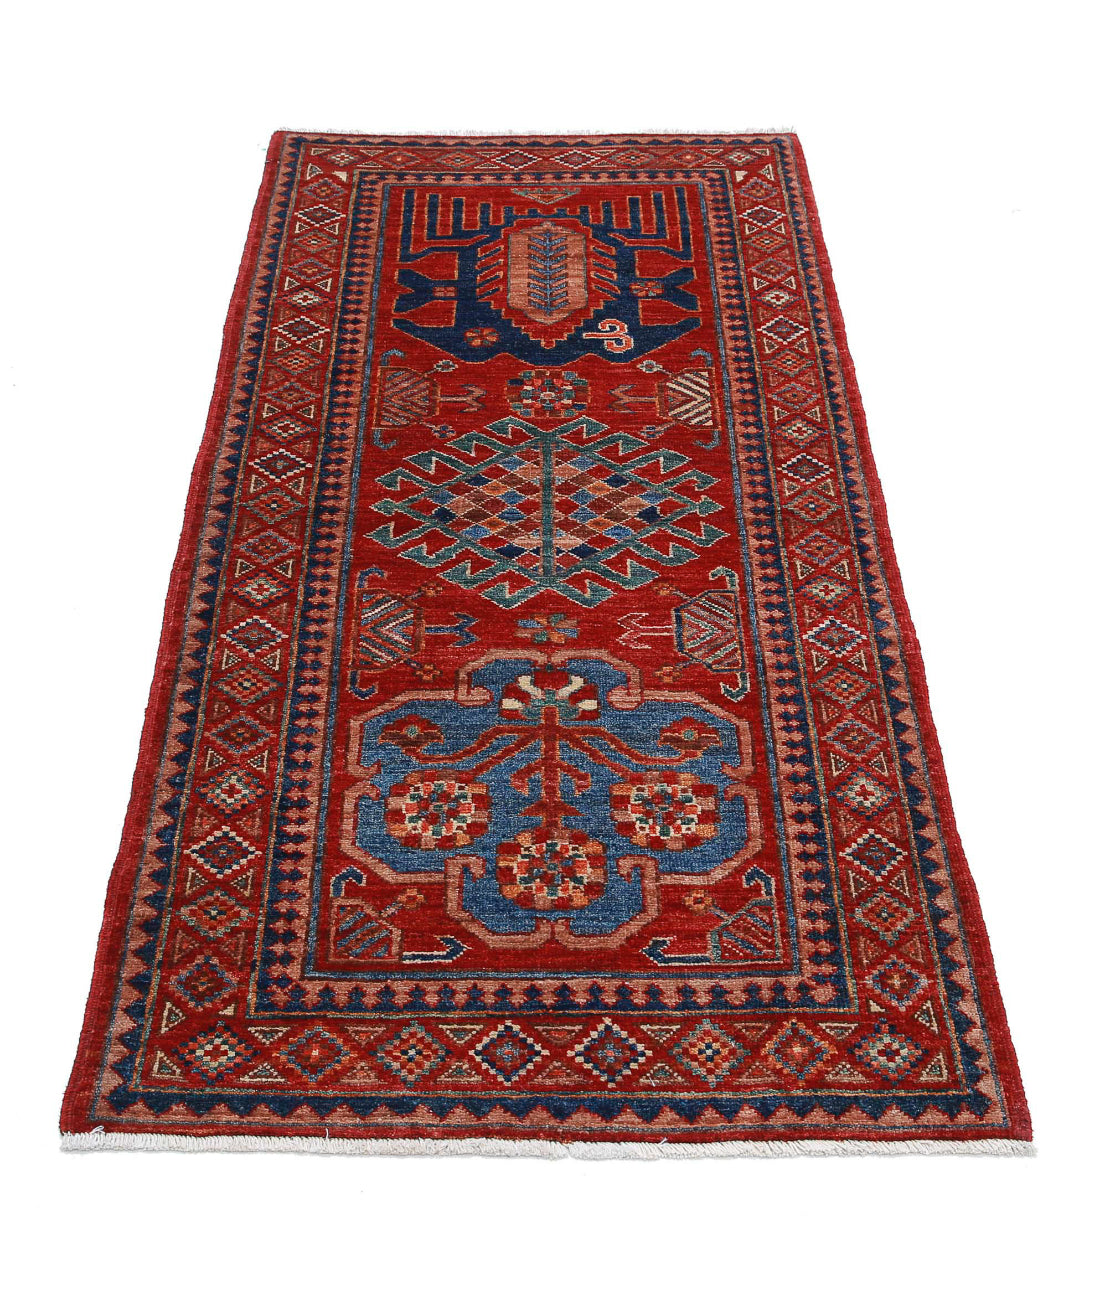 Hand Knotted Nomadic Caucasian Humna Wool Rug - 2'9'' x 5'10'' 2'9'' x 5'10'' (83 X 175) / Red / Taupe